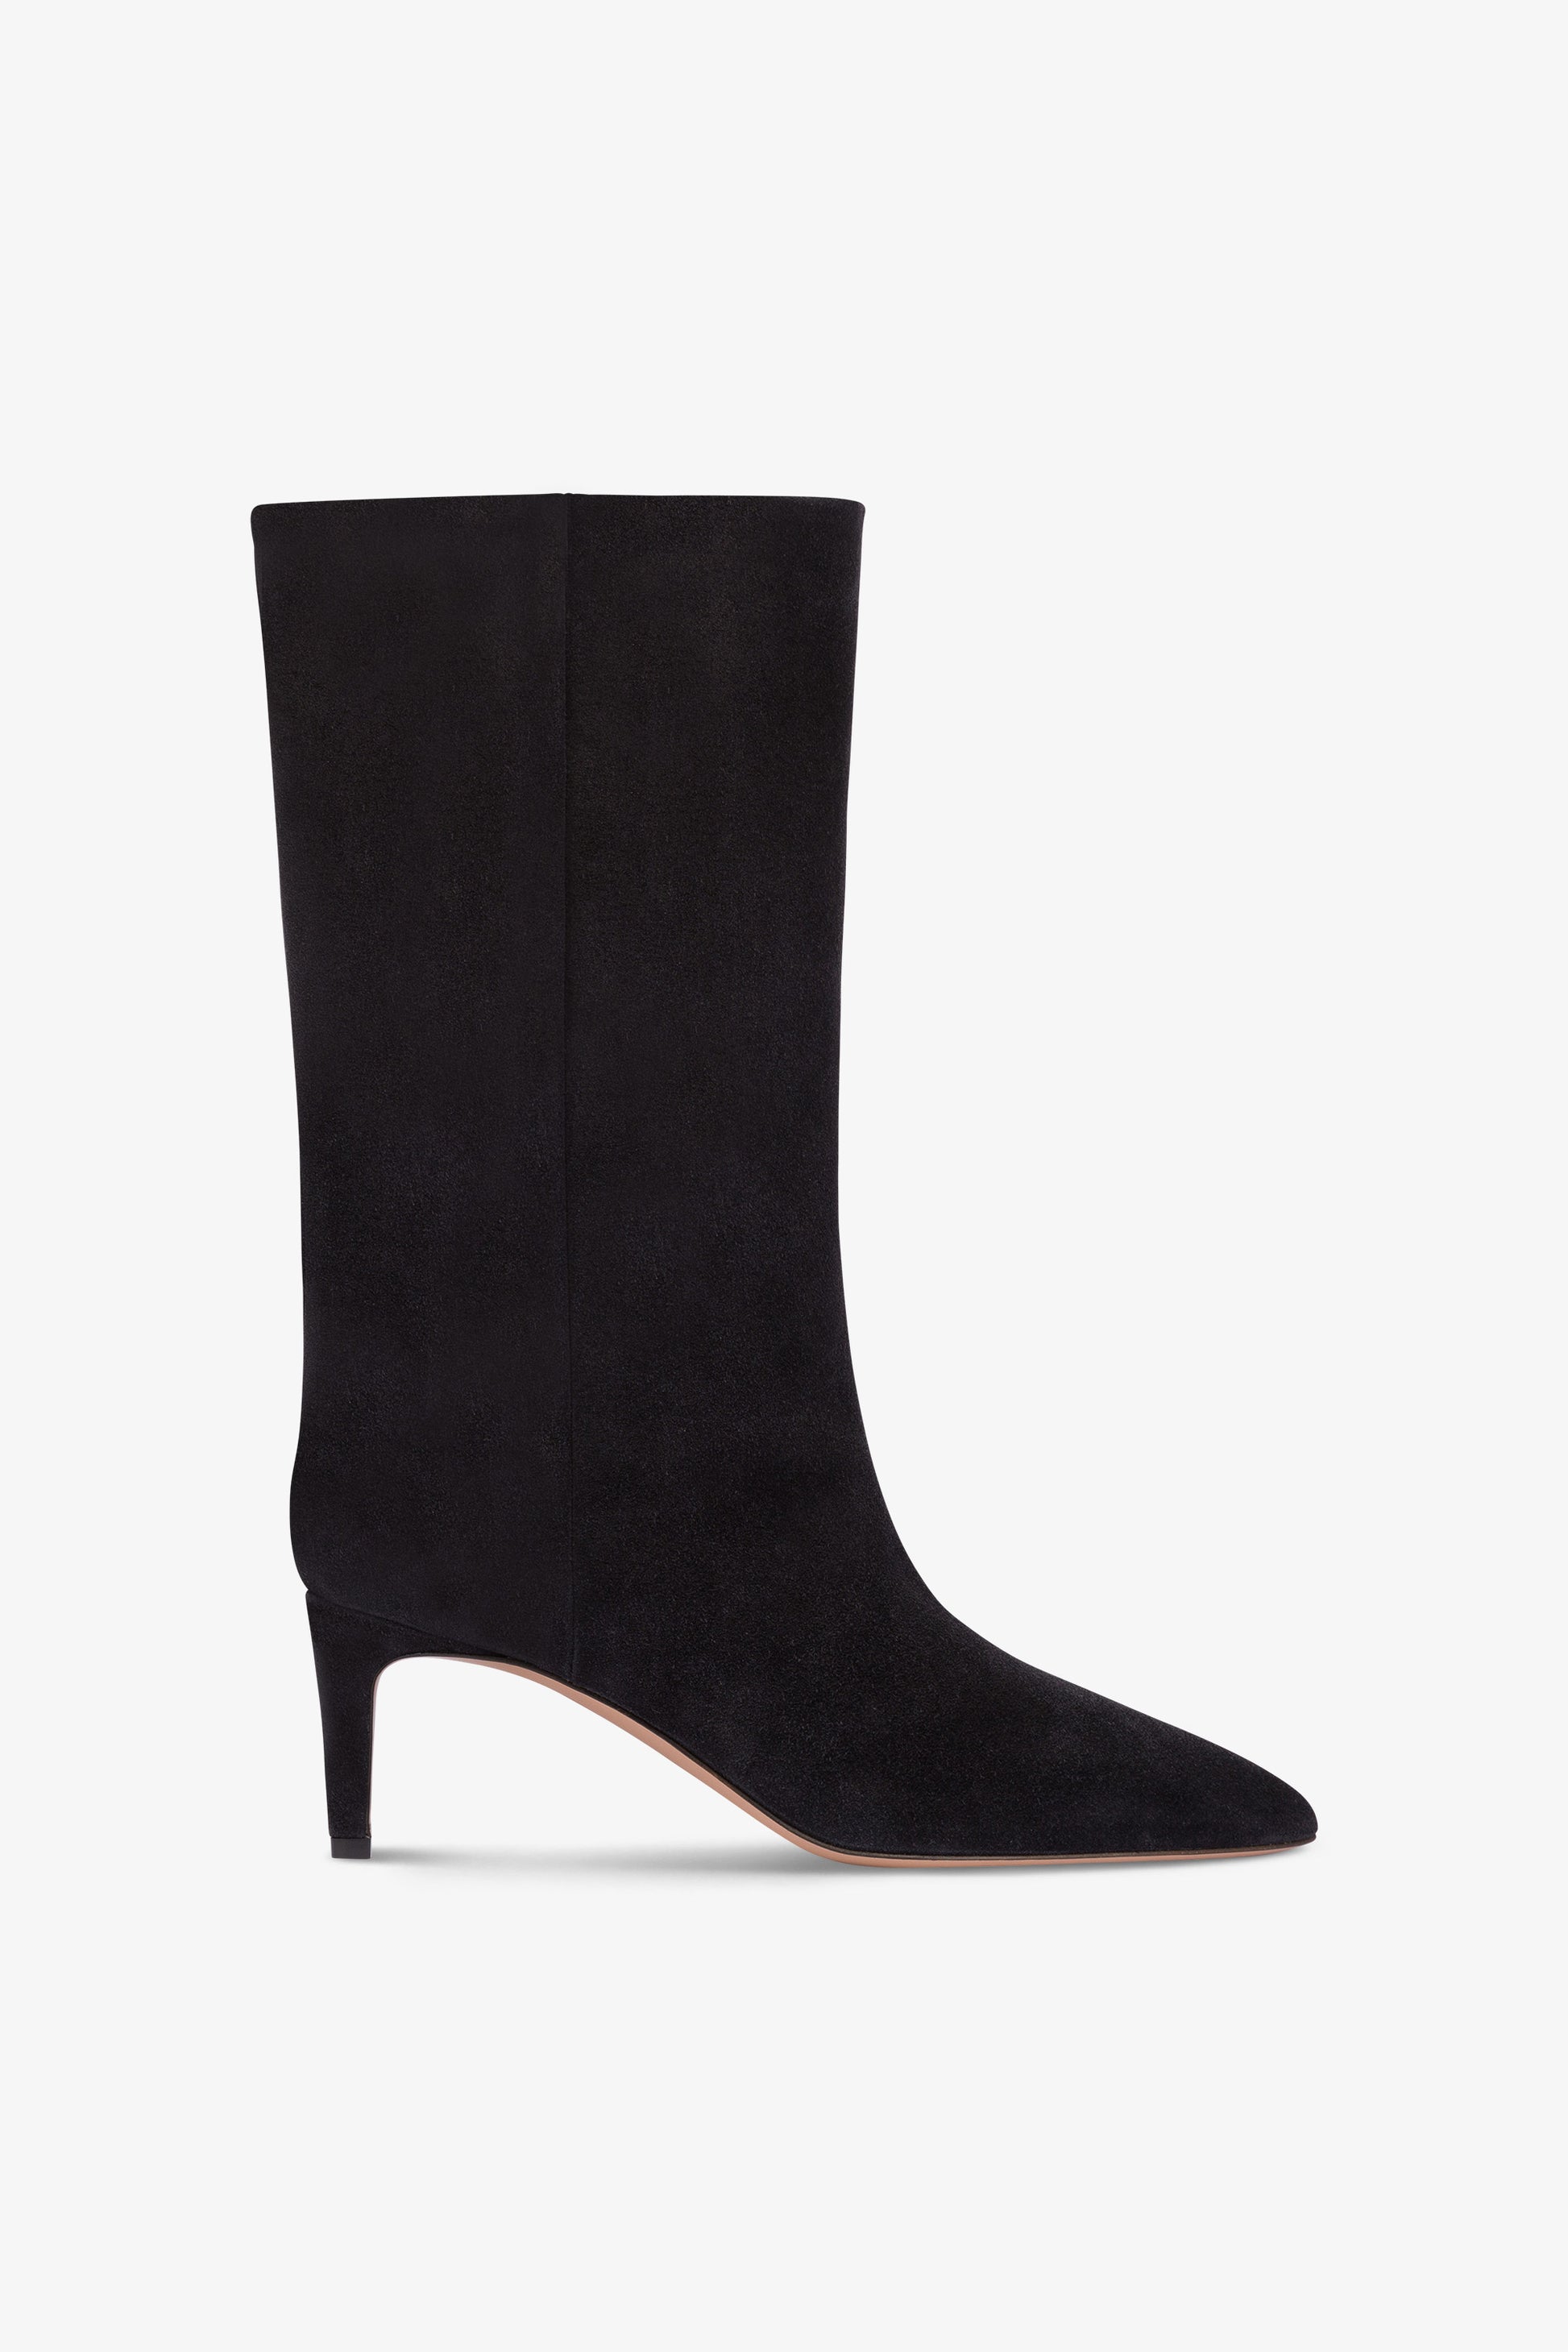 Calf-high boots in smooth off-black suede leather